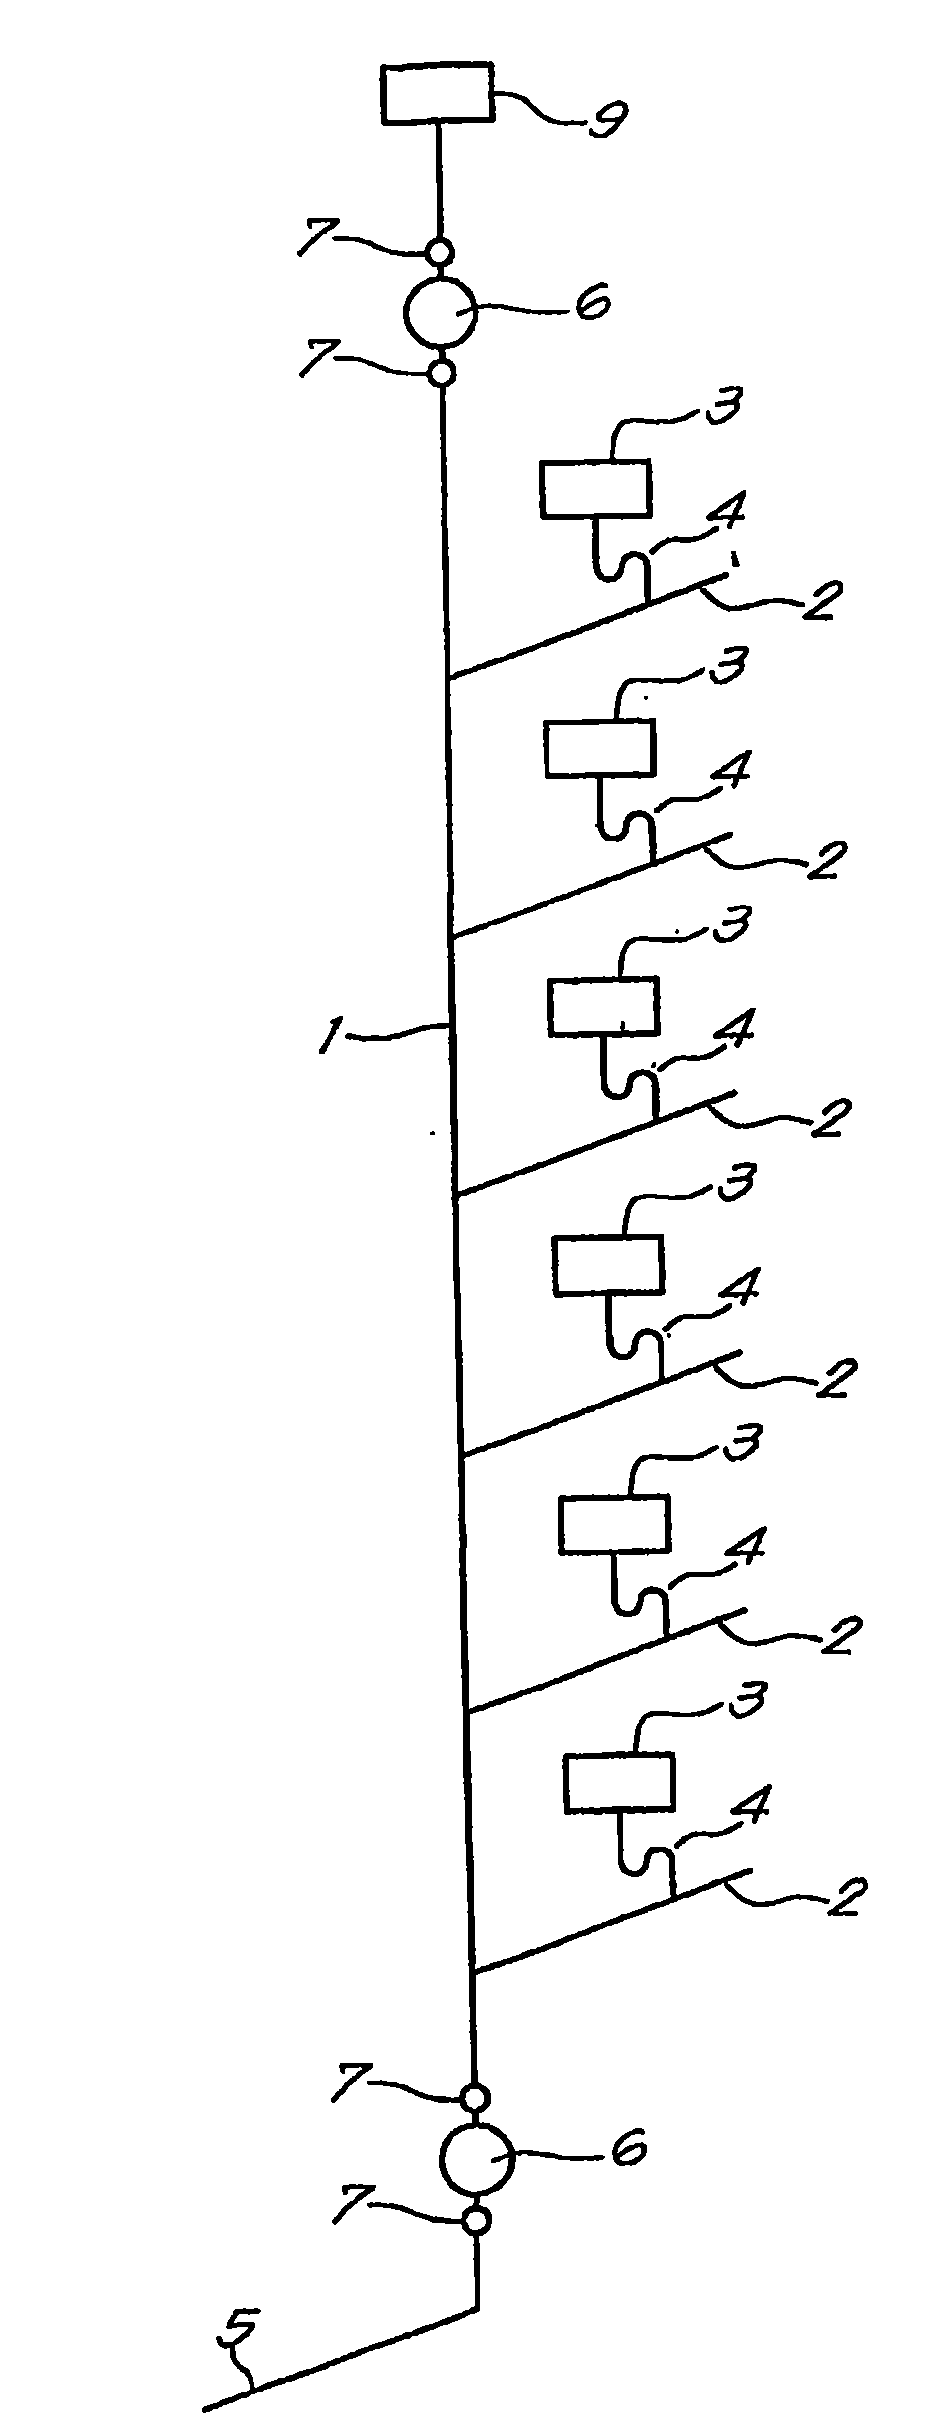 Method and equipment for detecting sealing deficiencies in drainage and vent systems for buildings